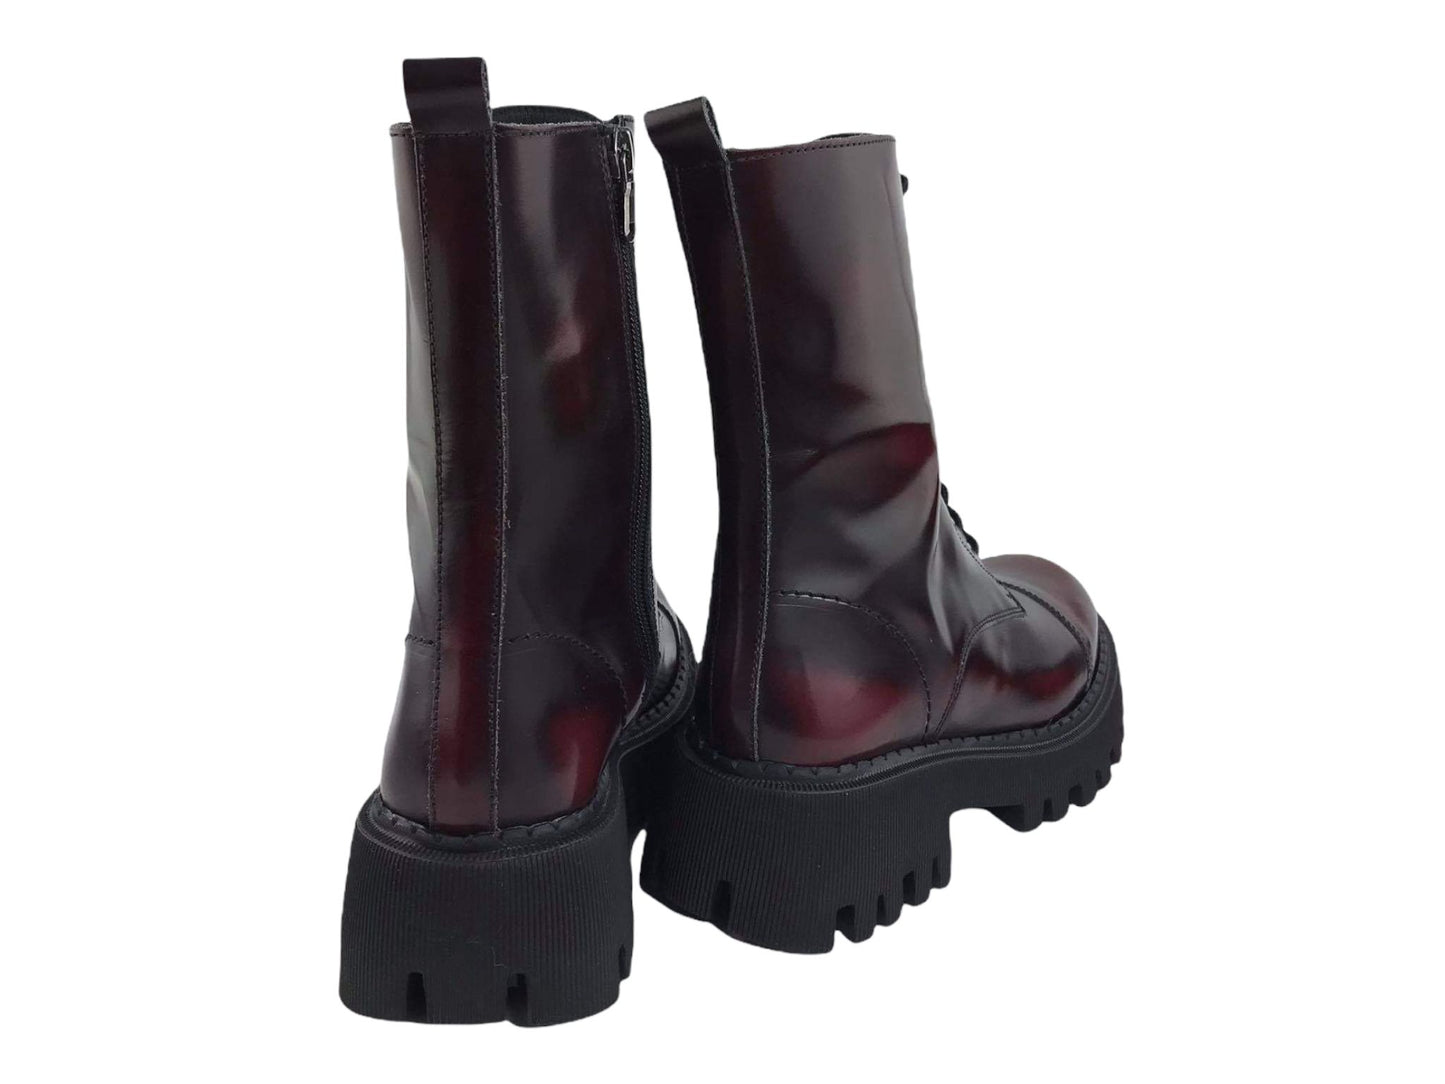 marnate | Women's Zareb military boots in maroon waxed leather